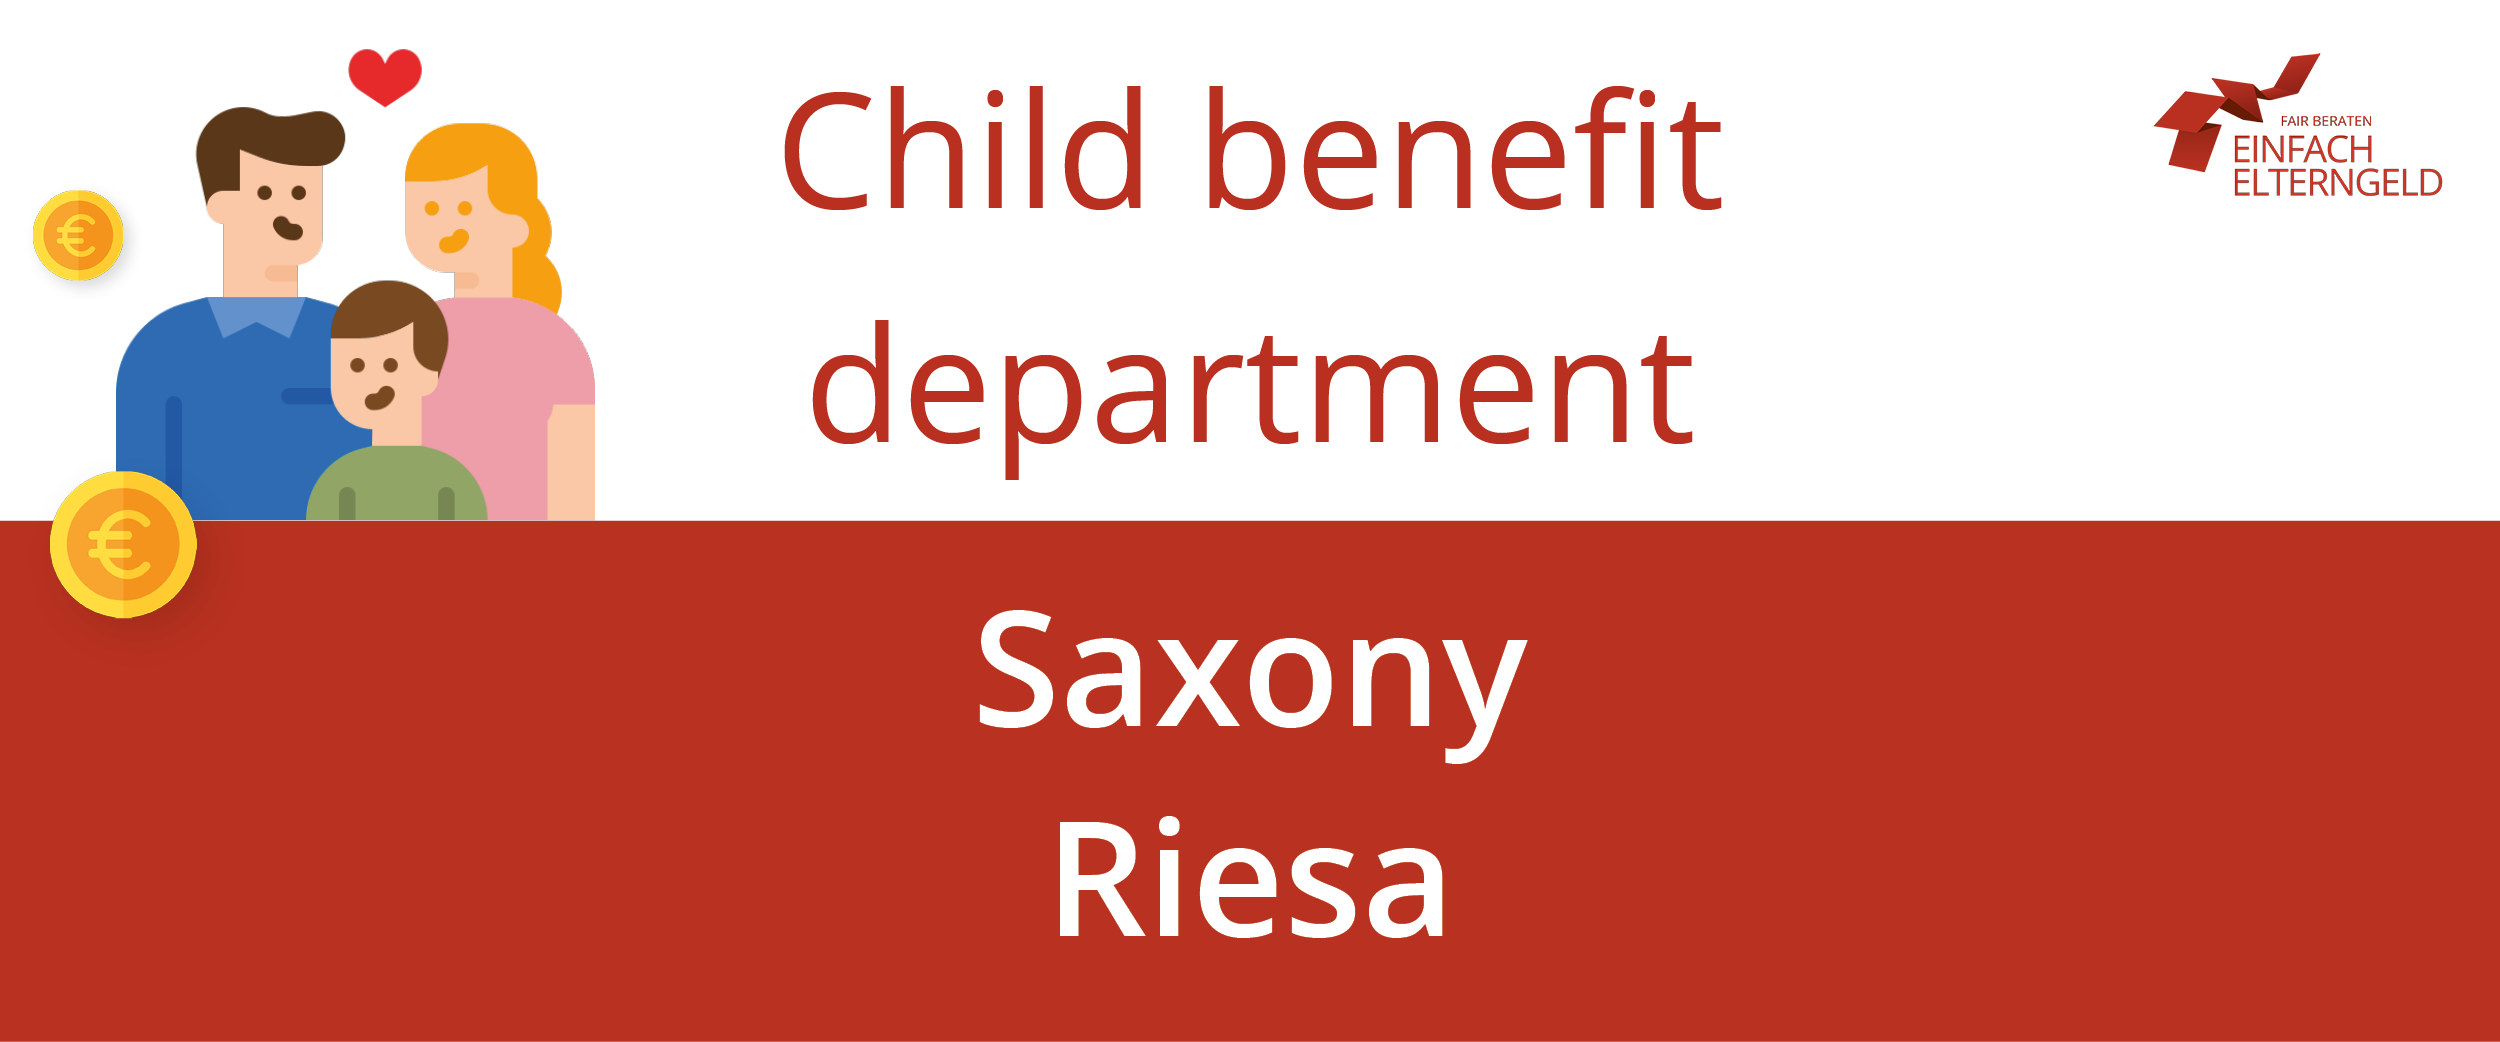 We present you the Child benefit department Saxony Riesa.